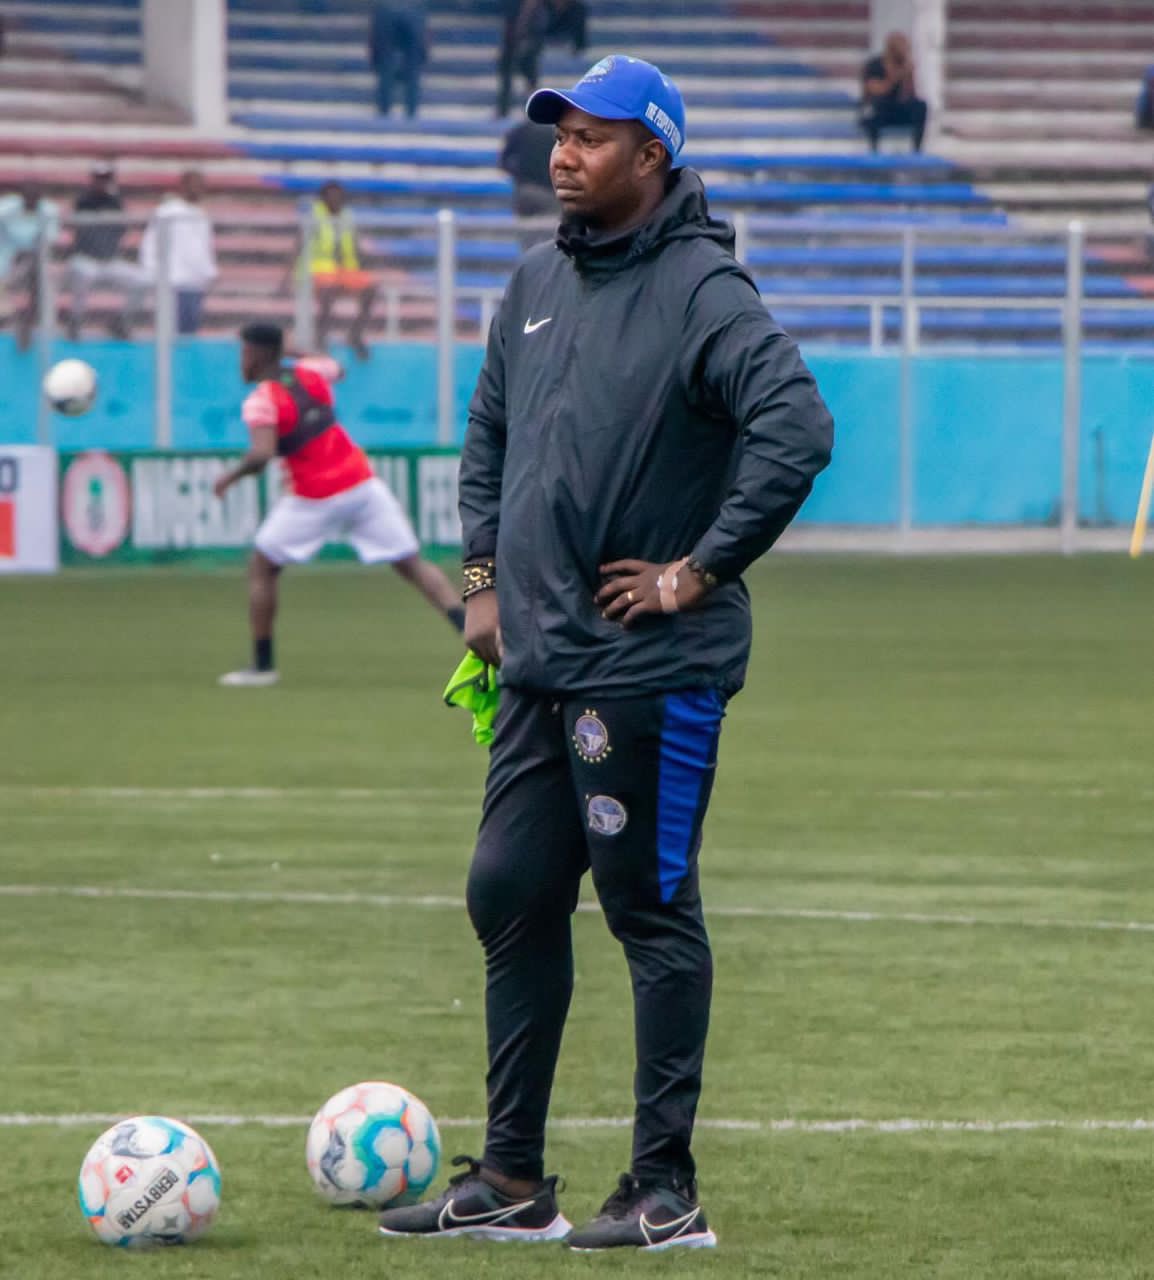 NPFL: Coach Olarenwaju Yemi appointed Enyimba Coach for the rest of the season